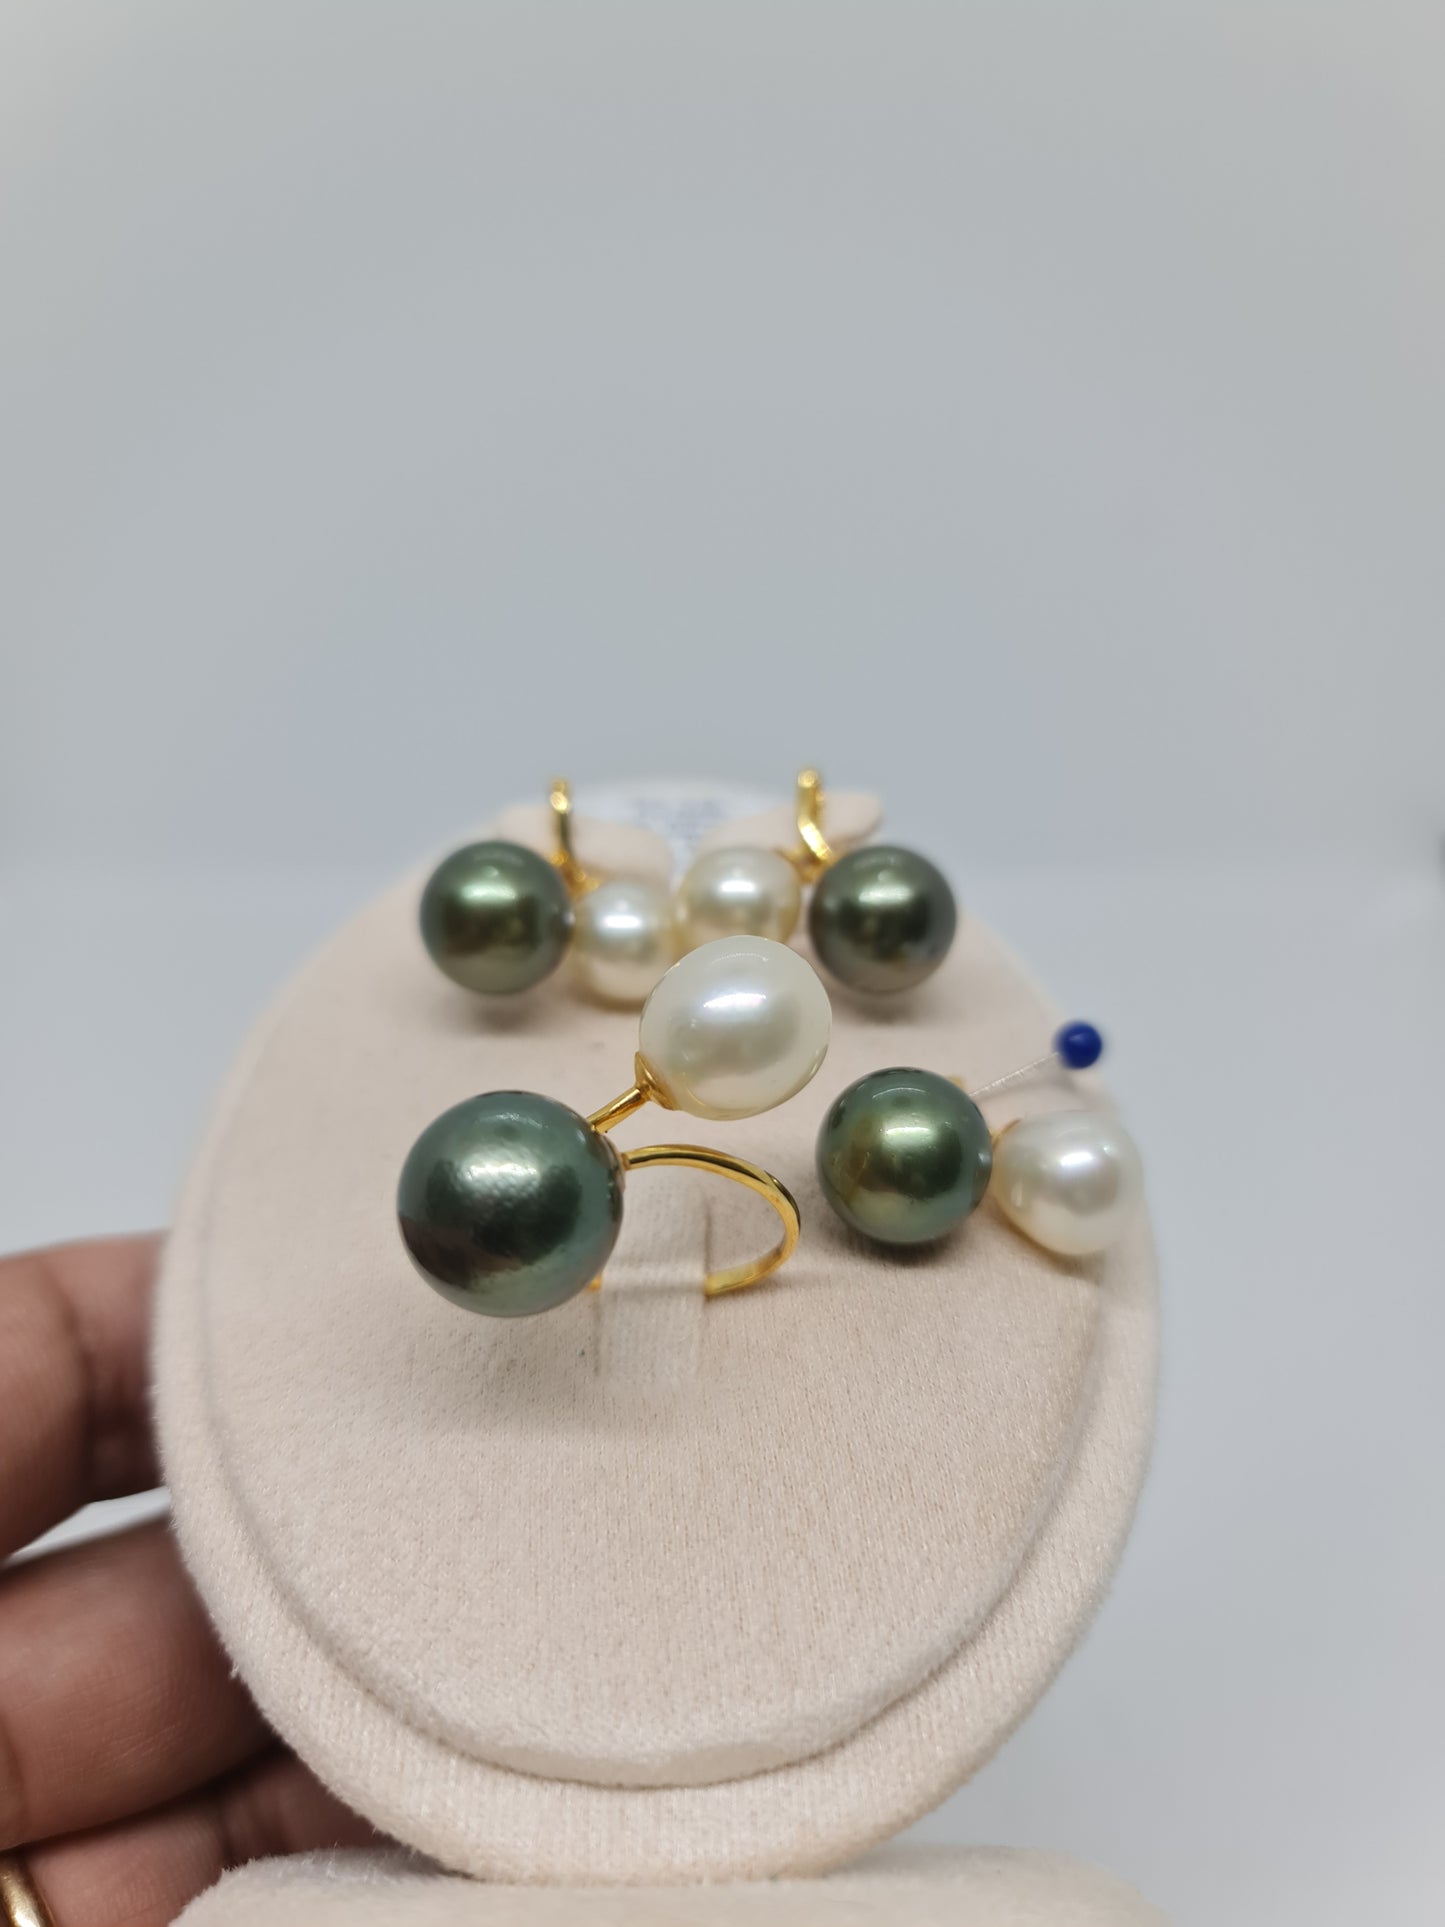 10.3mm to 13.3mm Creamy & Pistachio Green South Sea Pearls Set in 14K Gold